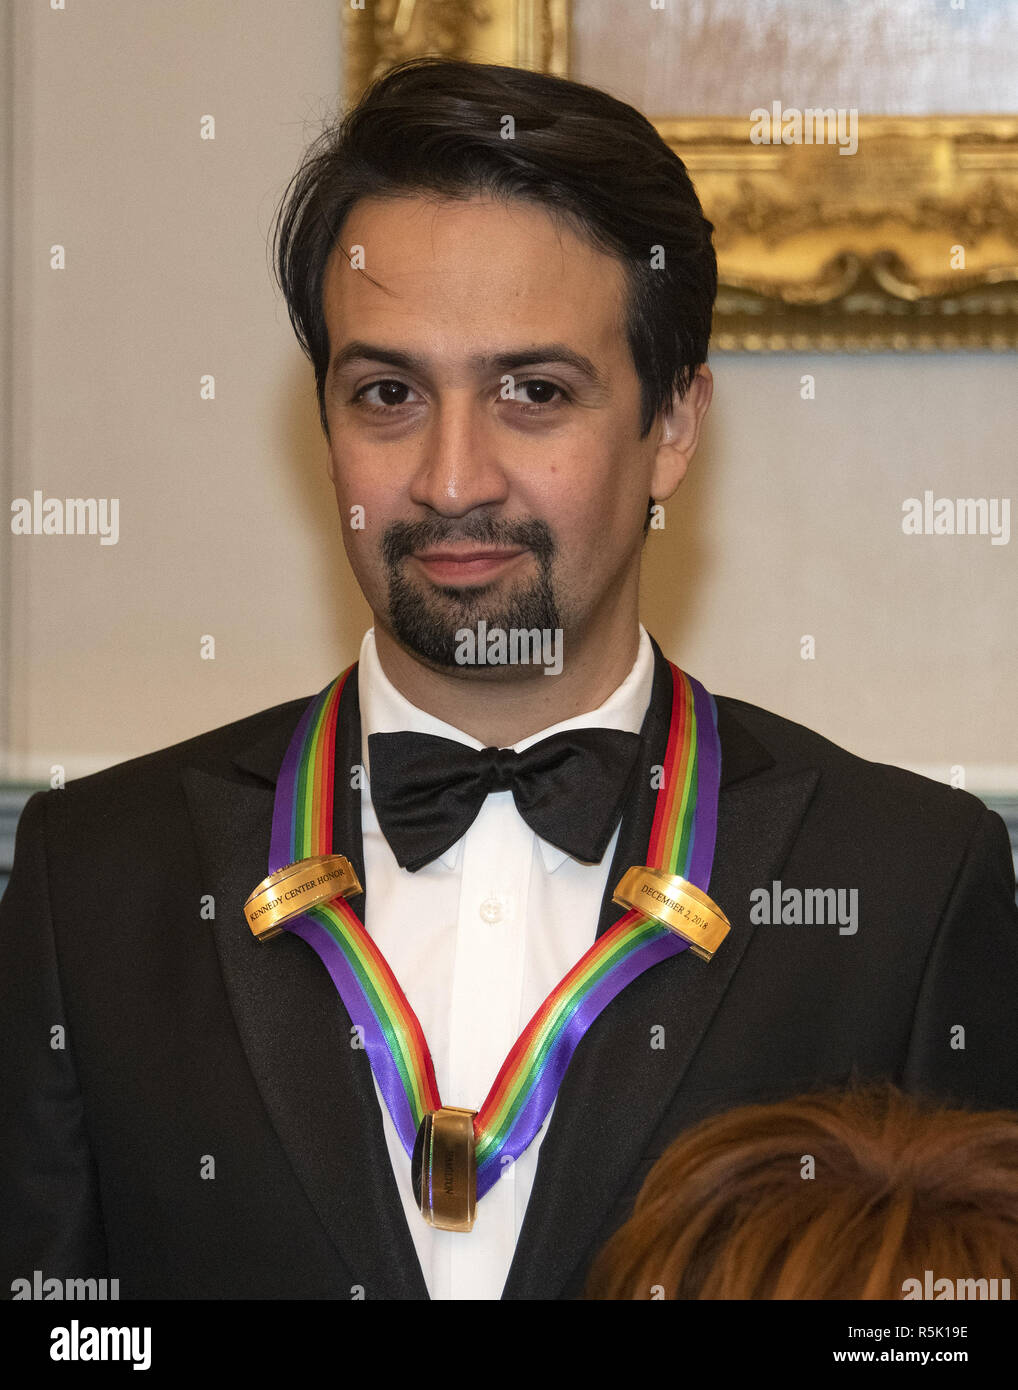 December 1, 2018 - Washington, District of Columbia, U.S. - Lin-Manuel Miranda, one of the special honorees for Groundbreaking Work on Hamilton, as he poses with the recipients of the 41st Annual Kennedy Center Honors pose for a group photo following a dinner hosted by United States Deputy Secretary of State John J. Sullivan in their honor at the US Department of State in Washington, DC on Saturday, December 1, 2018. The 2018 honorees are: singer and actress Cher; composer and pianist Philip Glass; Country music entertainer Reba McEntire; and jazz saxophonist and composer Wayne Shorter. Thi Stock Photo